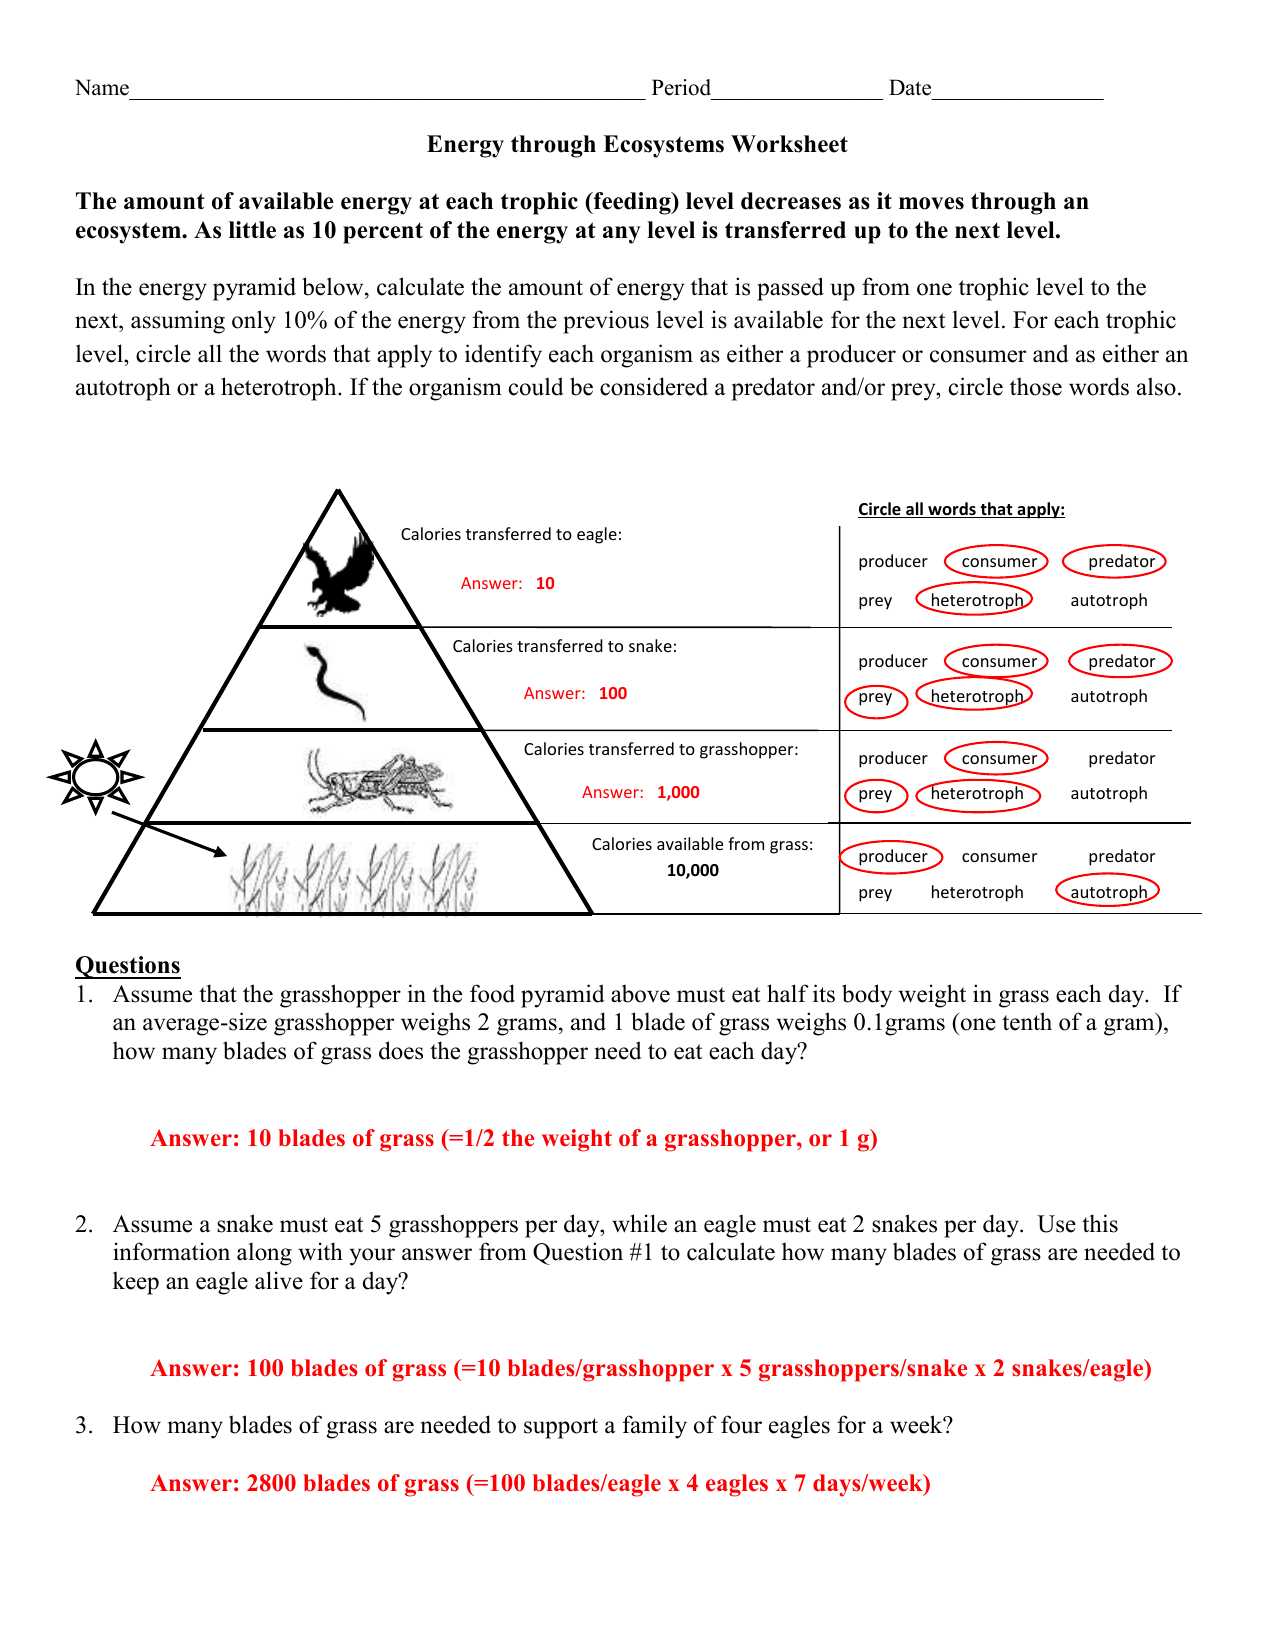 Food Web Worksheet Answers together with Ecological Pyramids Worksheet Answers Image Collections Worksheet